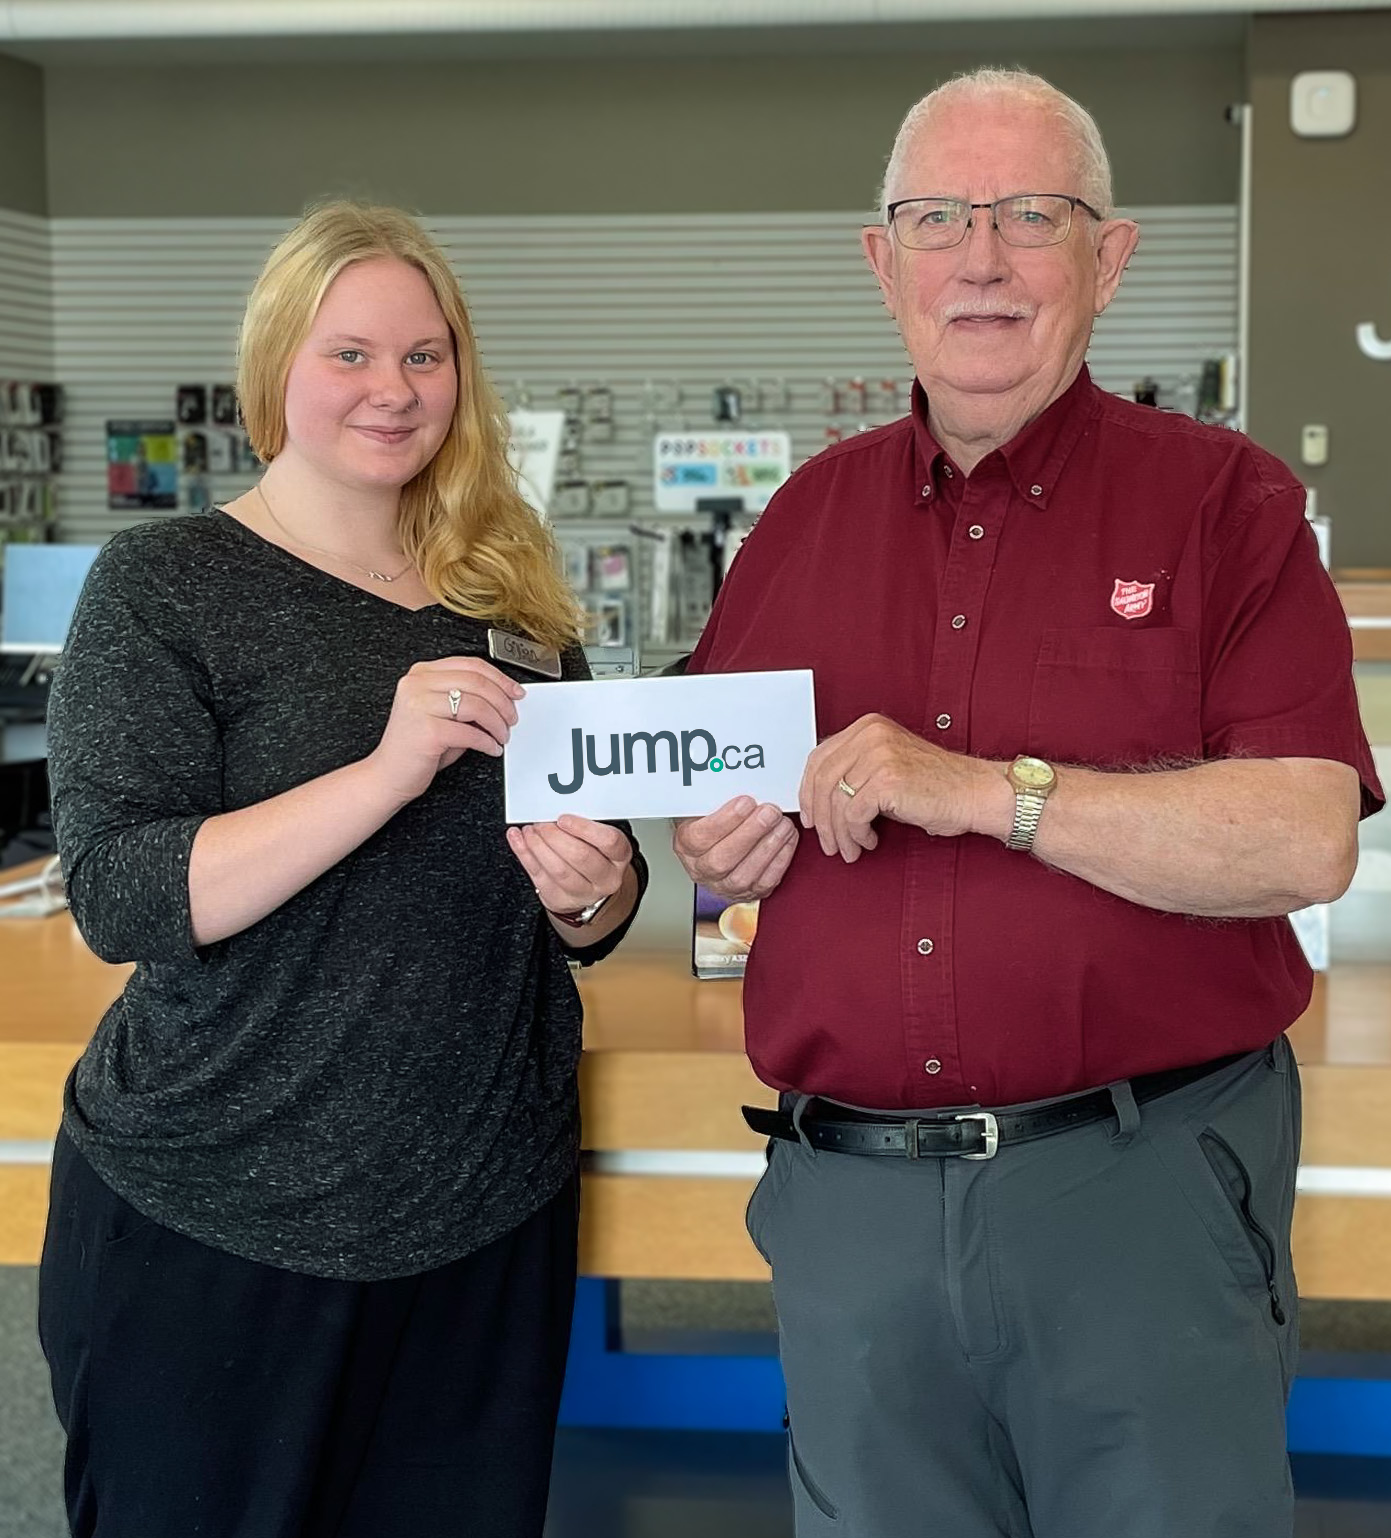 Two people, a young woman and an older man, smiling and holding a 'Jump.ca' sign inside a retail store with a background of phone accessories.